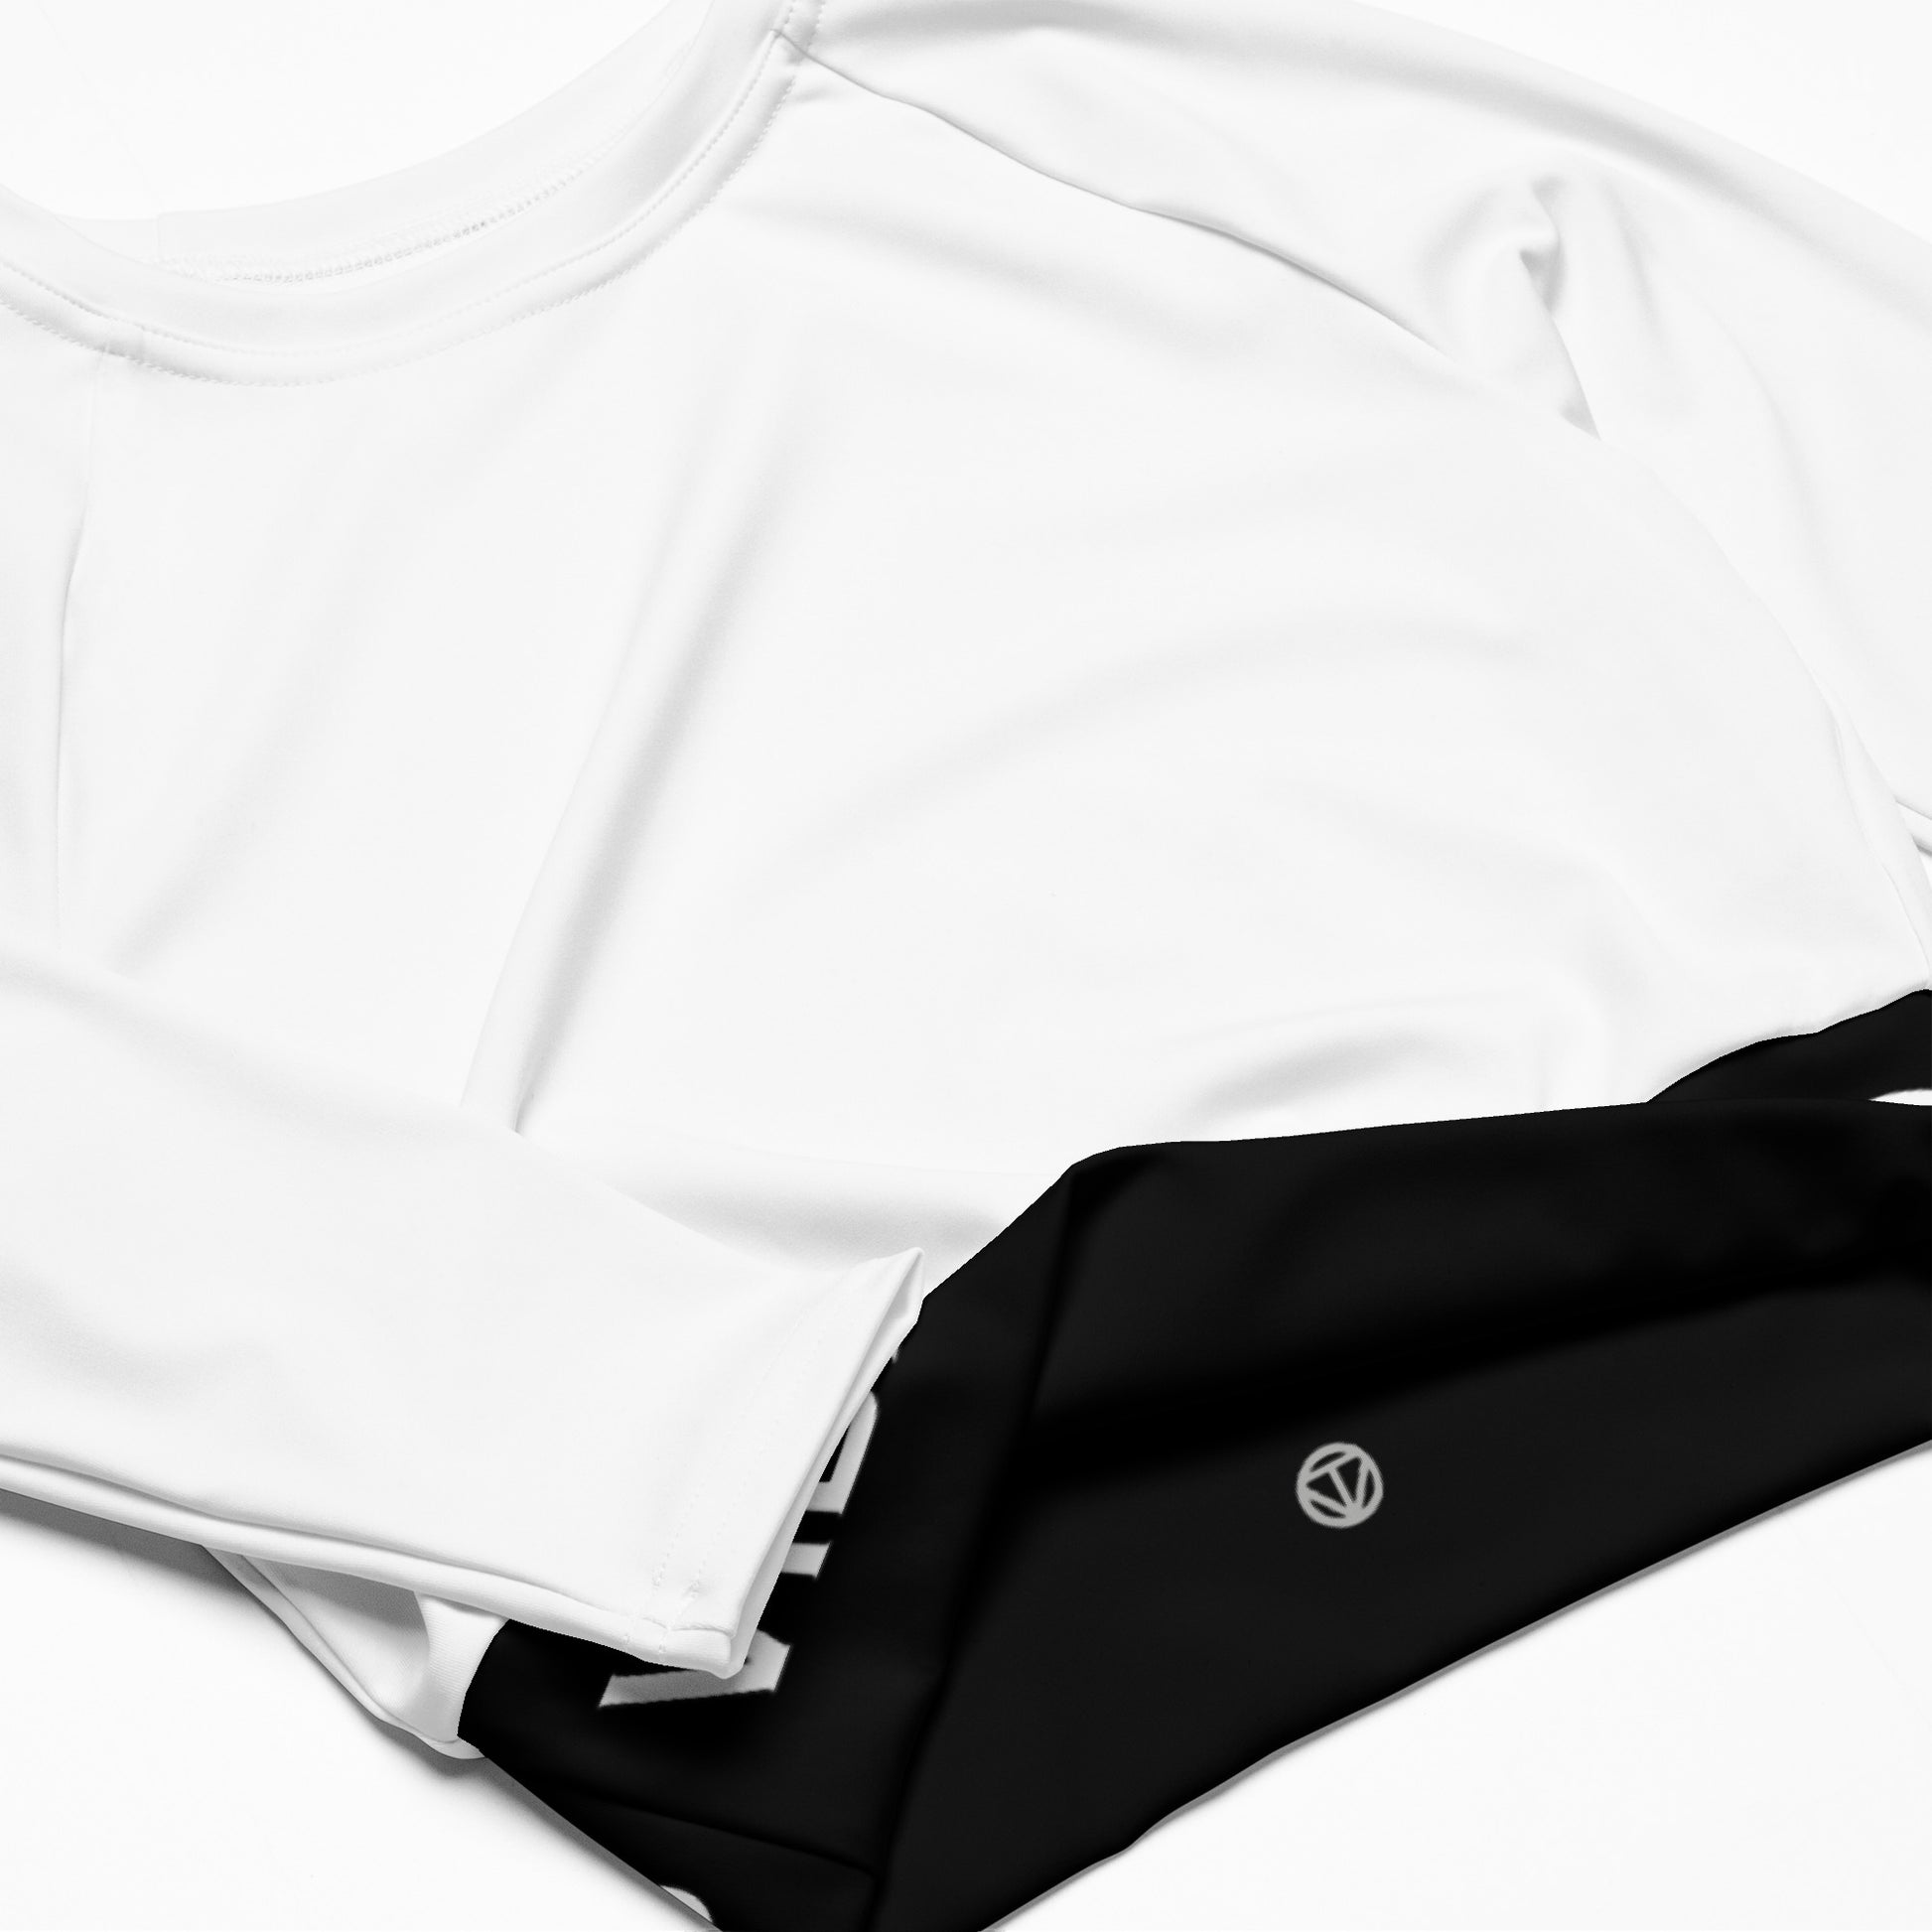 TIME OF VIBES - Recycled long-sleeve crop top VIBES (White/Black) - €54.00